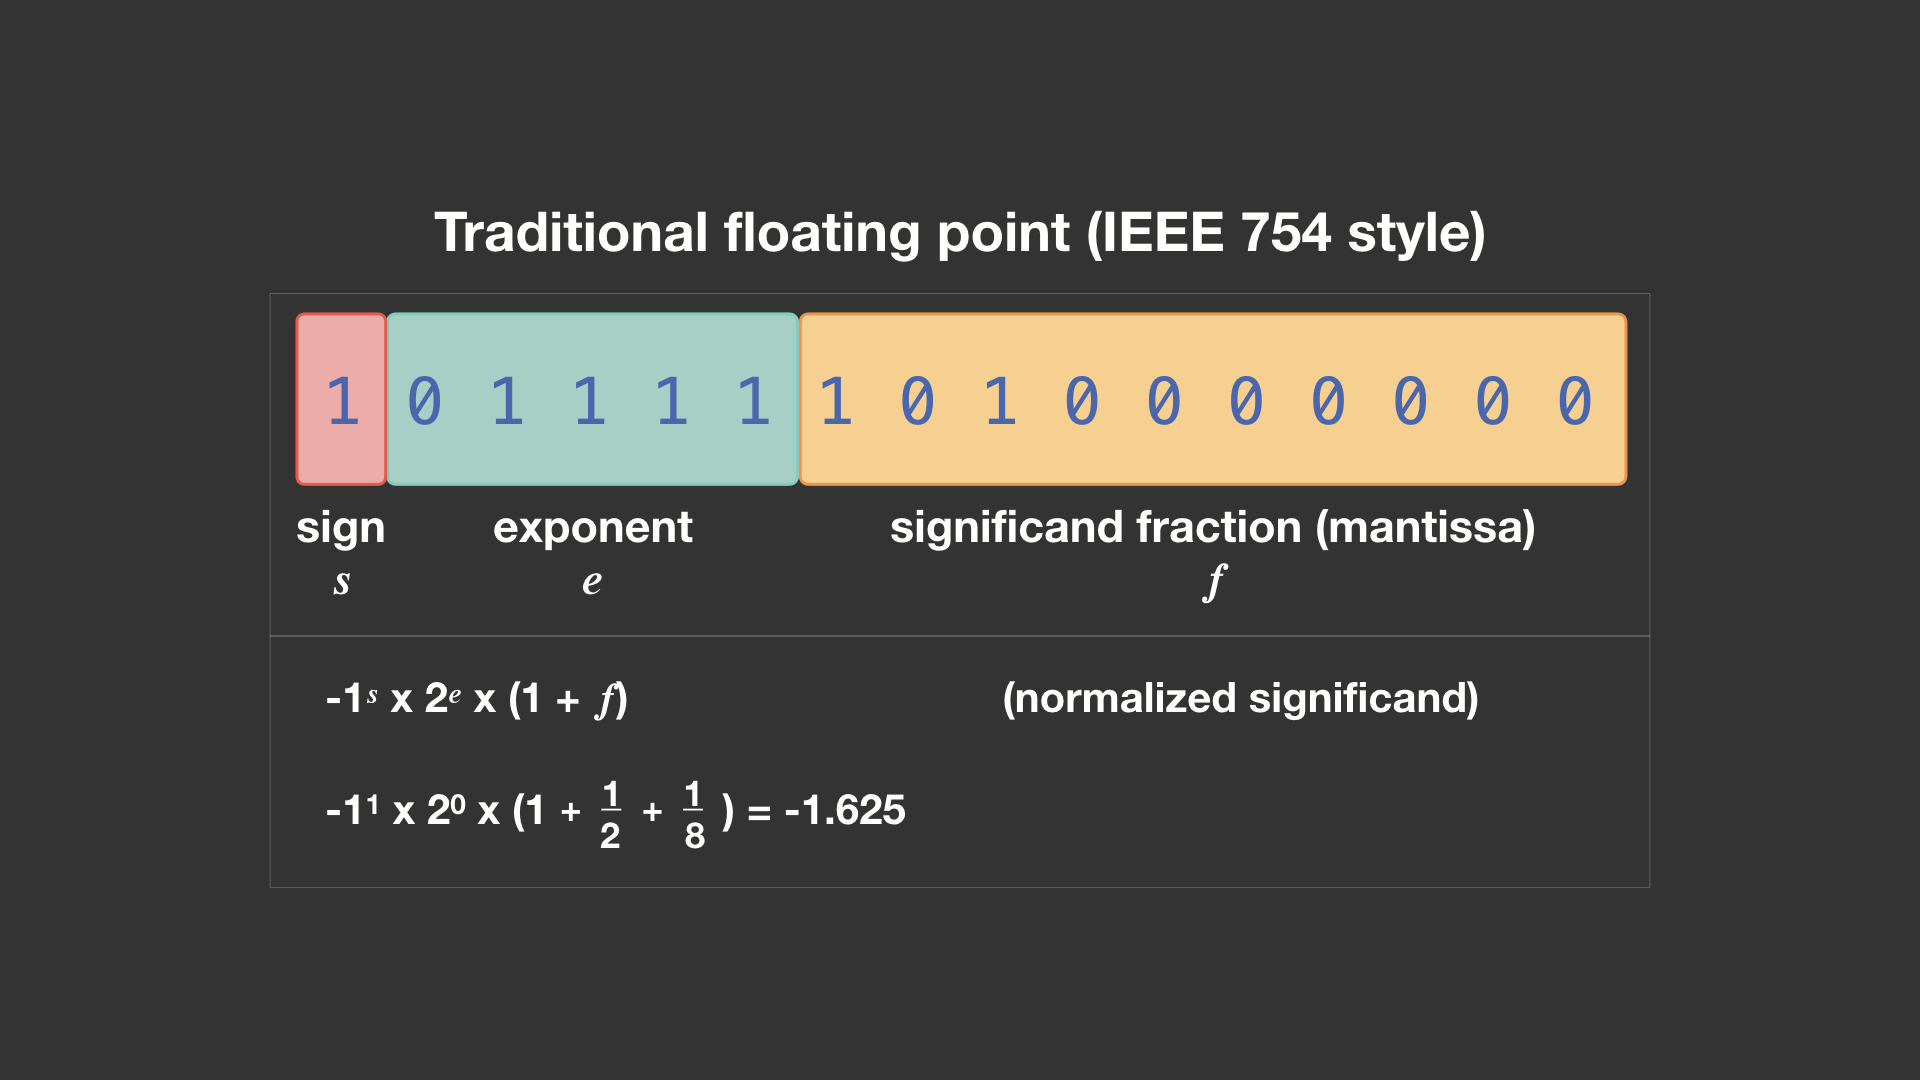 An encoding of -1.625 in 16-bit IEEE 754 binary16 half-precision floating point, with a fixed-size, 5-bit exponent and 10-bit significand fraction. The IEEE exponent has a bias of -15 added to it, so the encoded exponent 15 below actually represents (15 - 15) or 0.